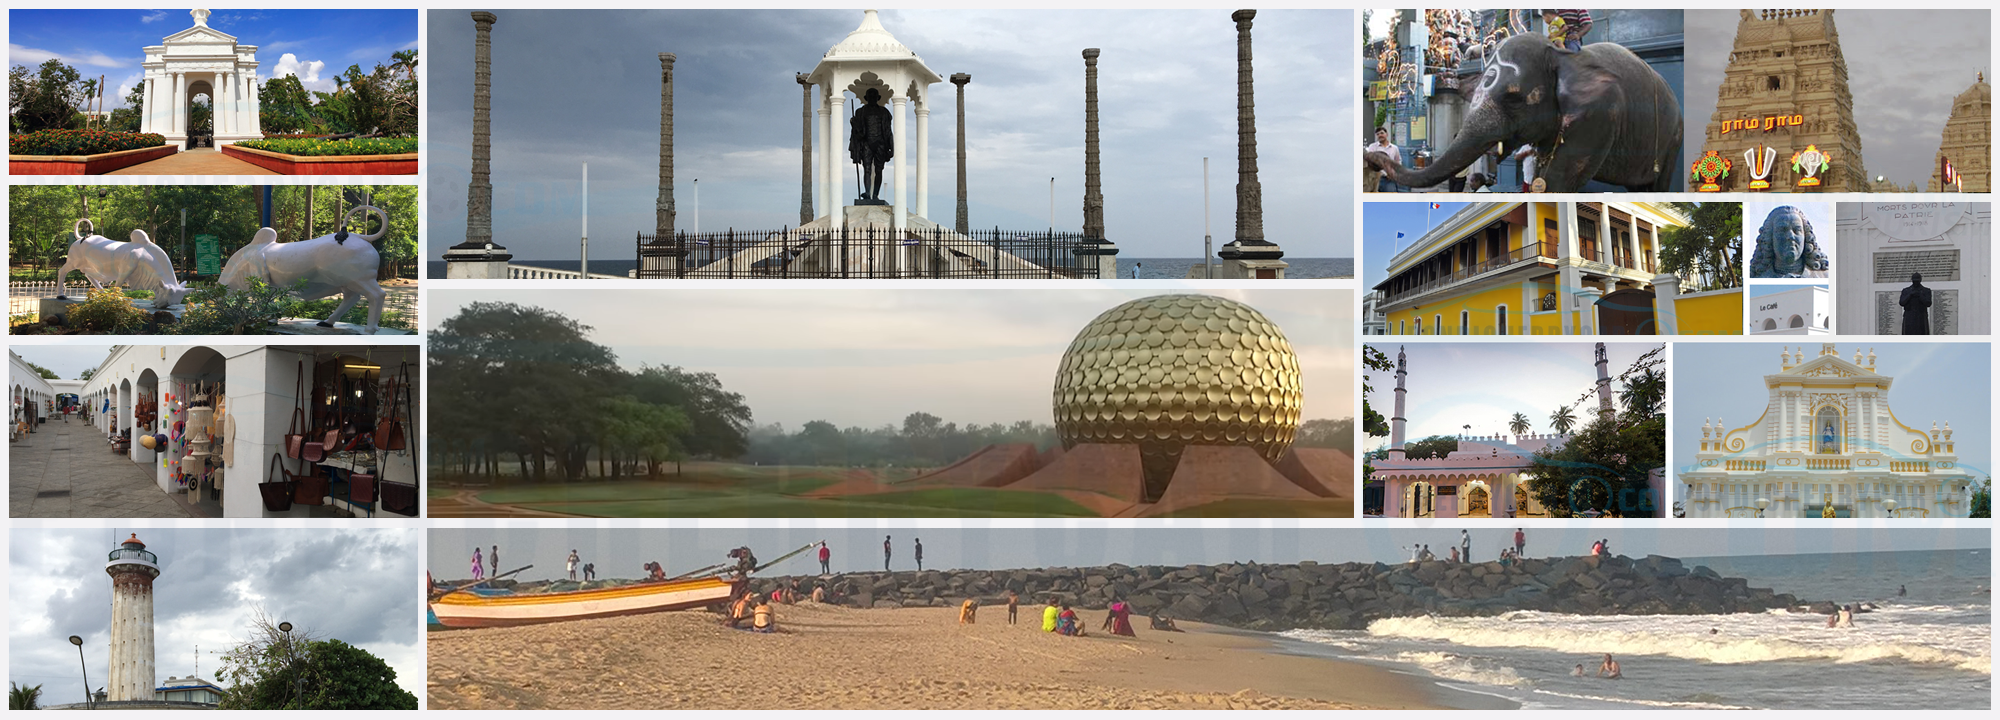 Pondicherry tour and sightseeing attractions